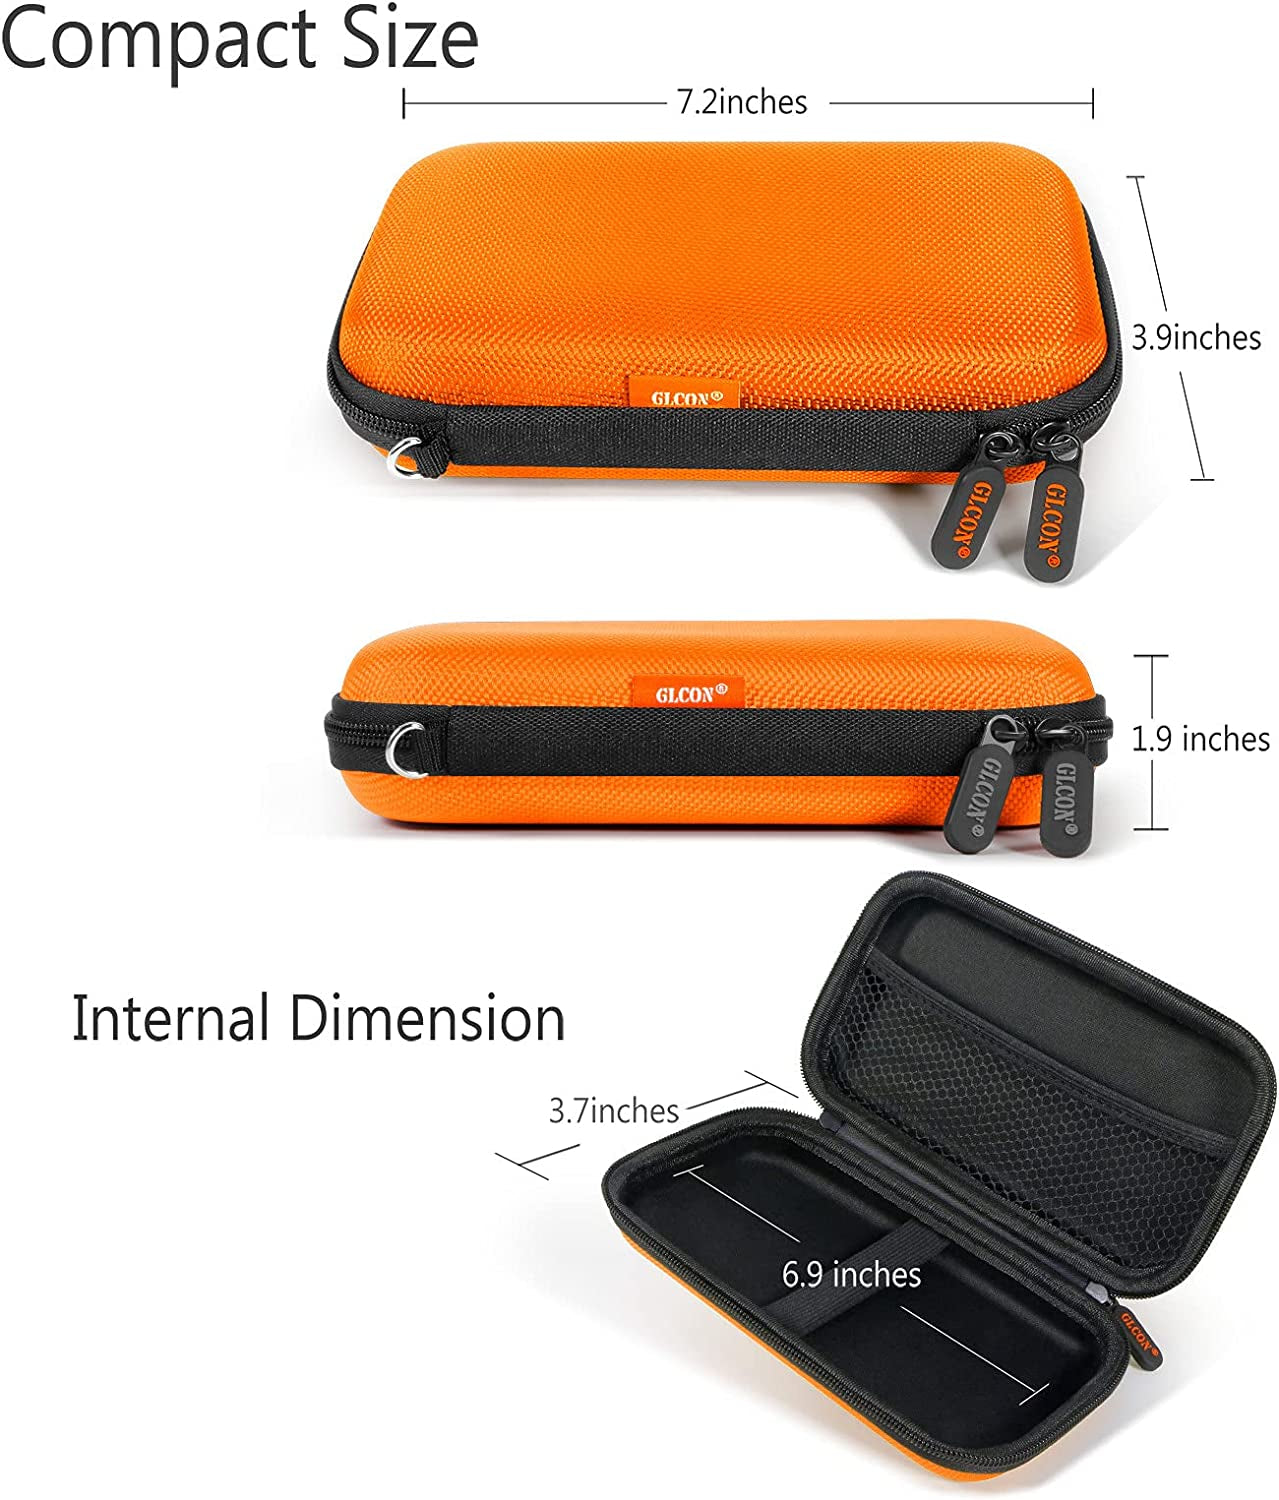 Orange Shockproof Hard EVA Carrying Case Travel Pouch for External Hard Drive, Power Bank, Cell Phone, Cable, Cord - Portable Small Electronic Accessories Organizer Storage Zipper Pouch